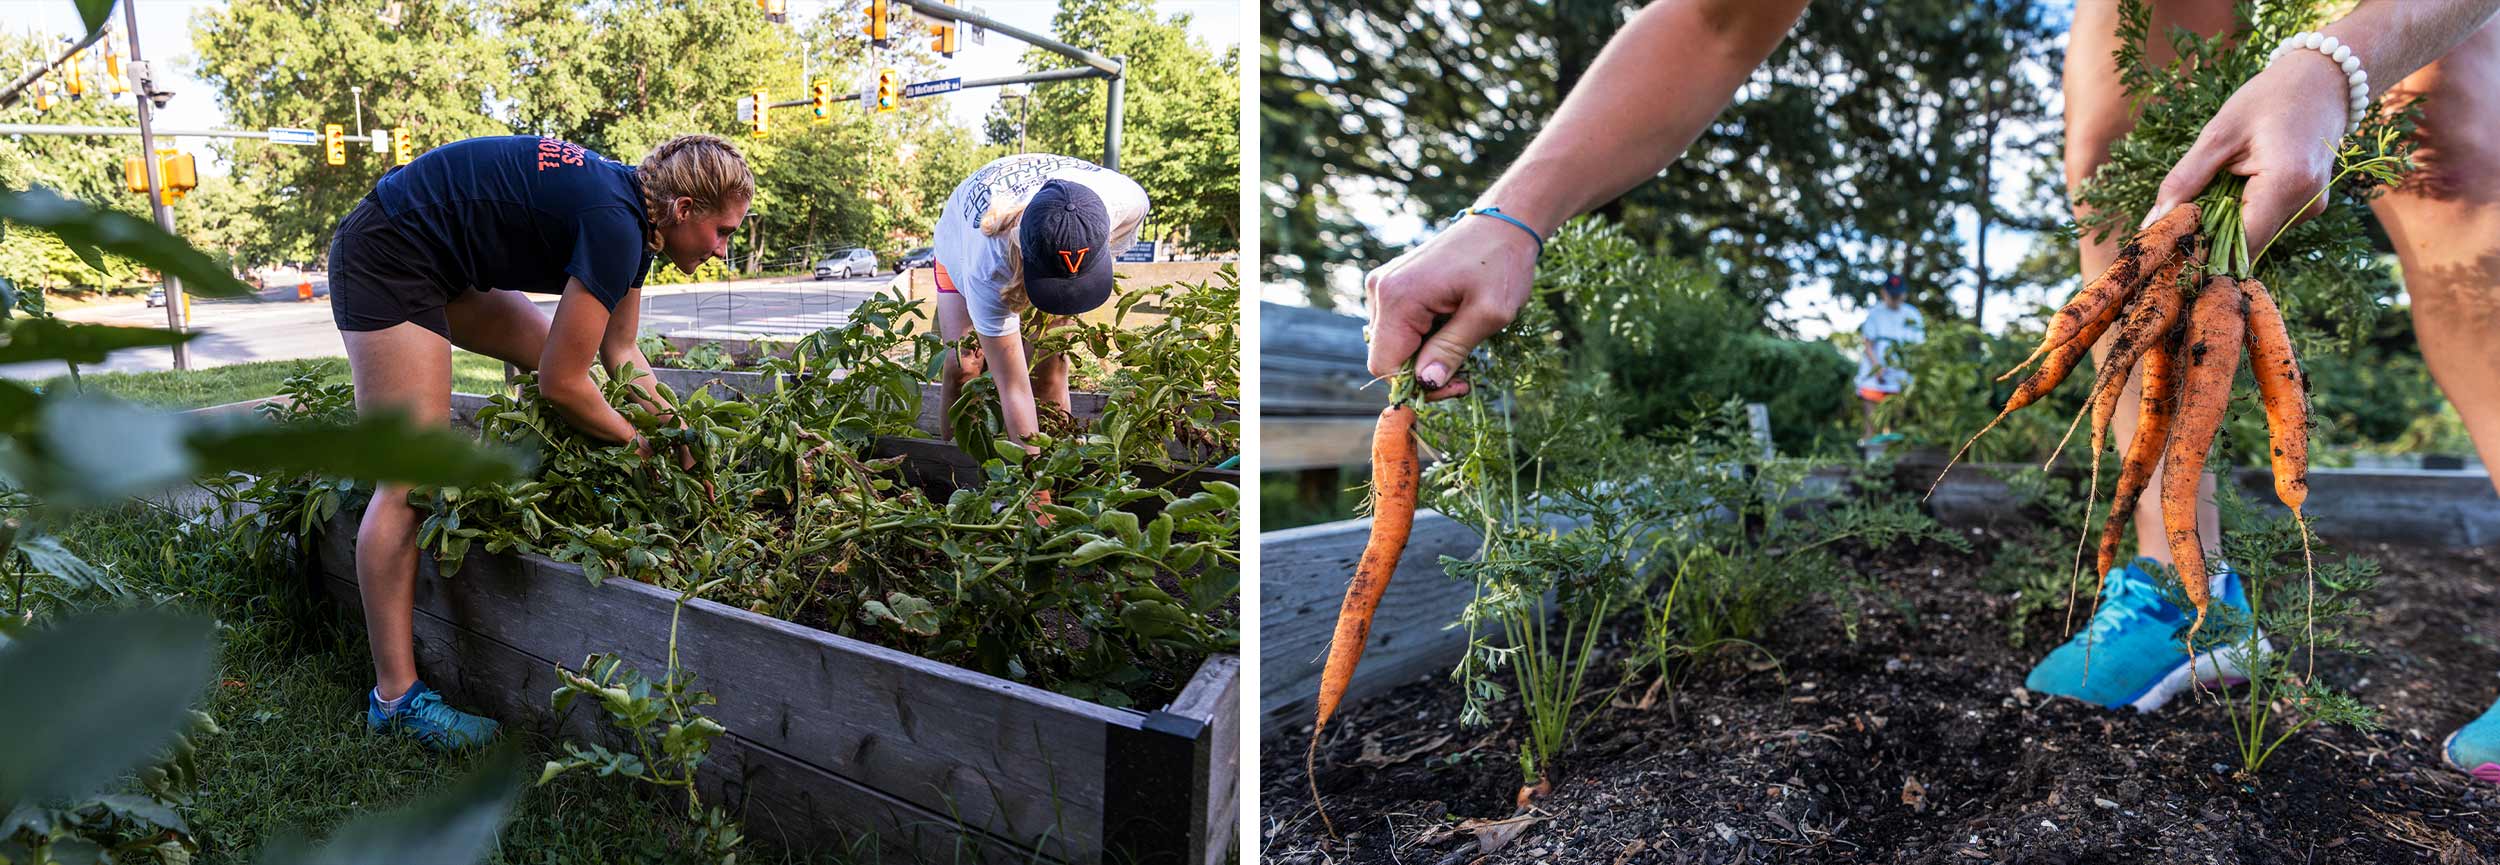 Two college students pull ripe carrots from a garden bed.